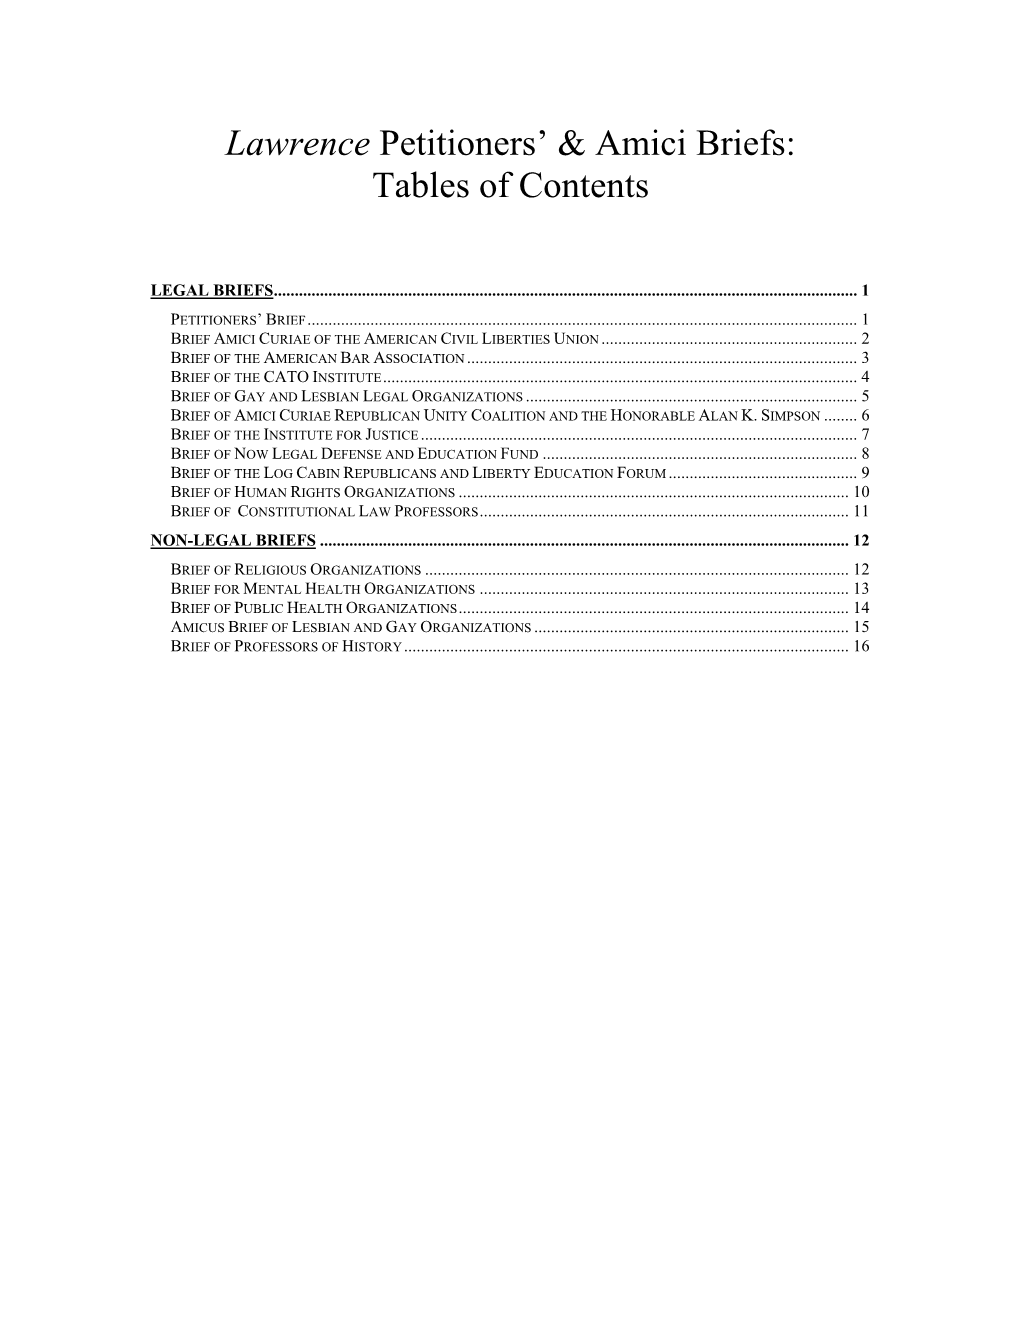 Lawrence Amici: Tables of Contents